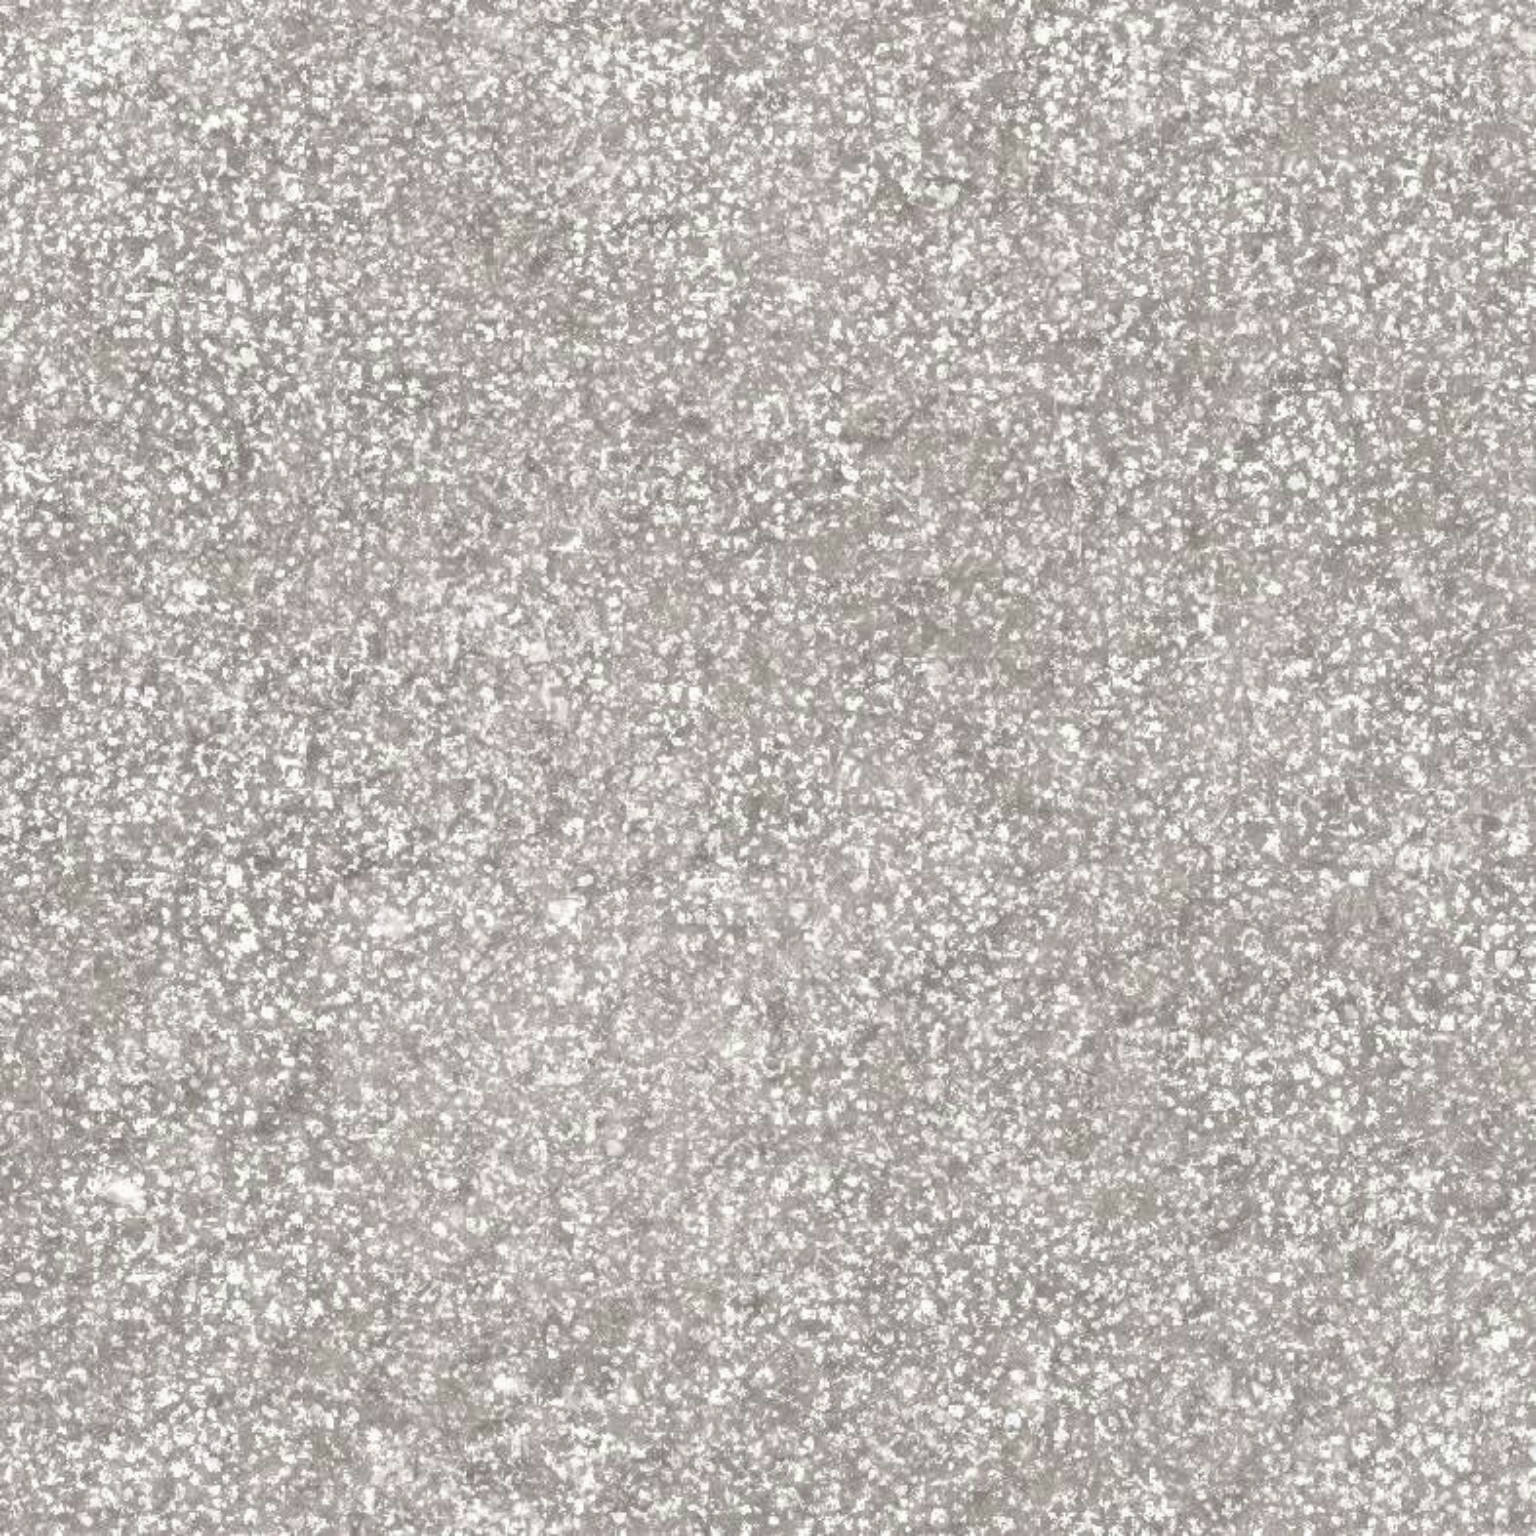 Pierre Grey Dot | Stones & More | Finest selection of Mosaics, Glass, Tile and Stone